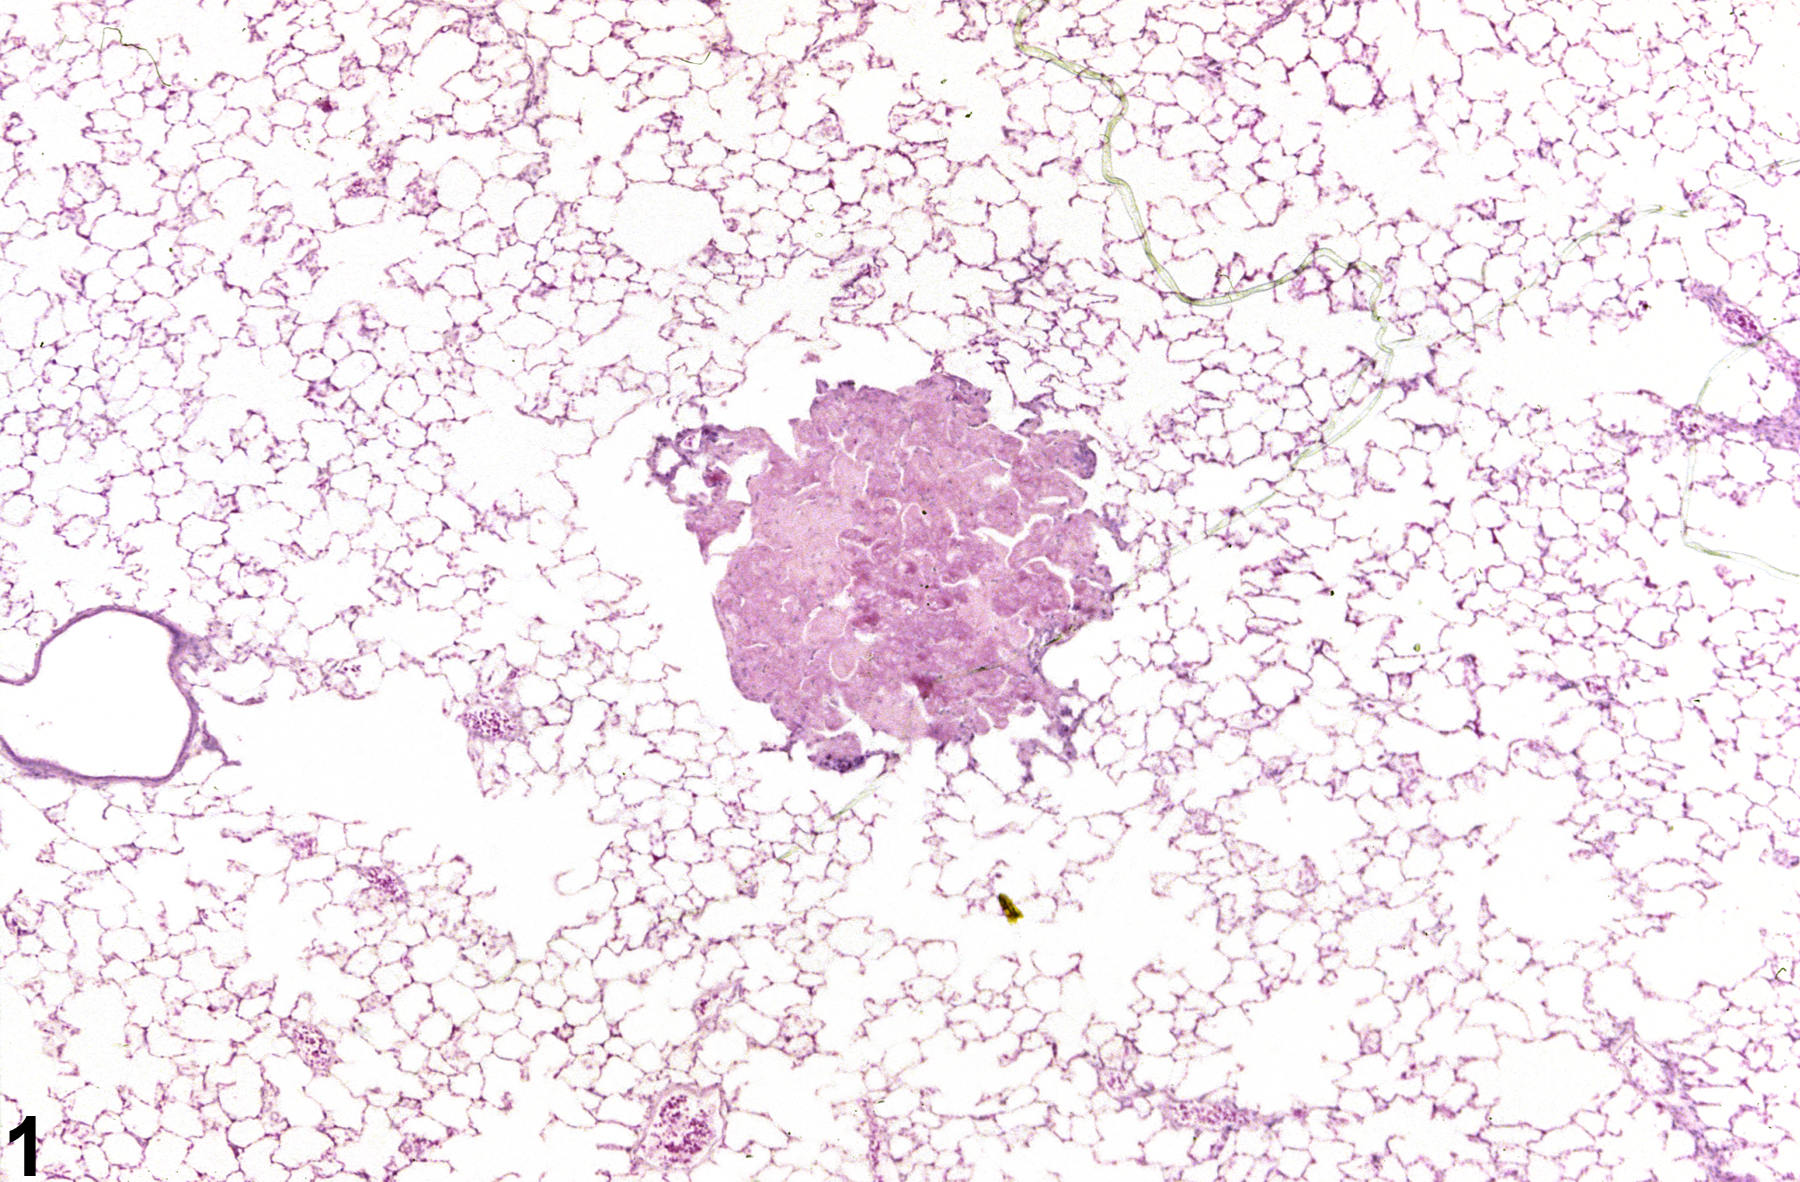 Image of osseous metaplasia in the lung from an  F344/N rat in a chronic study